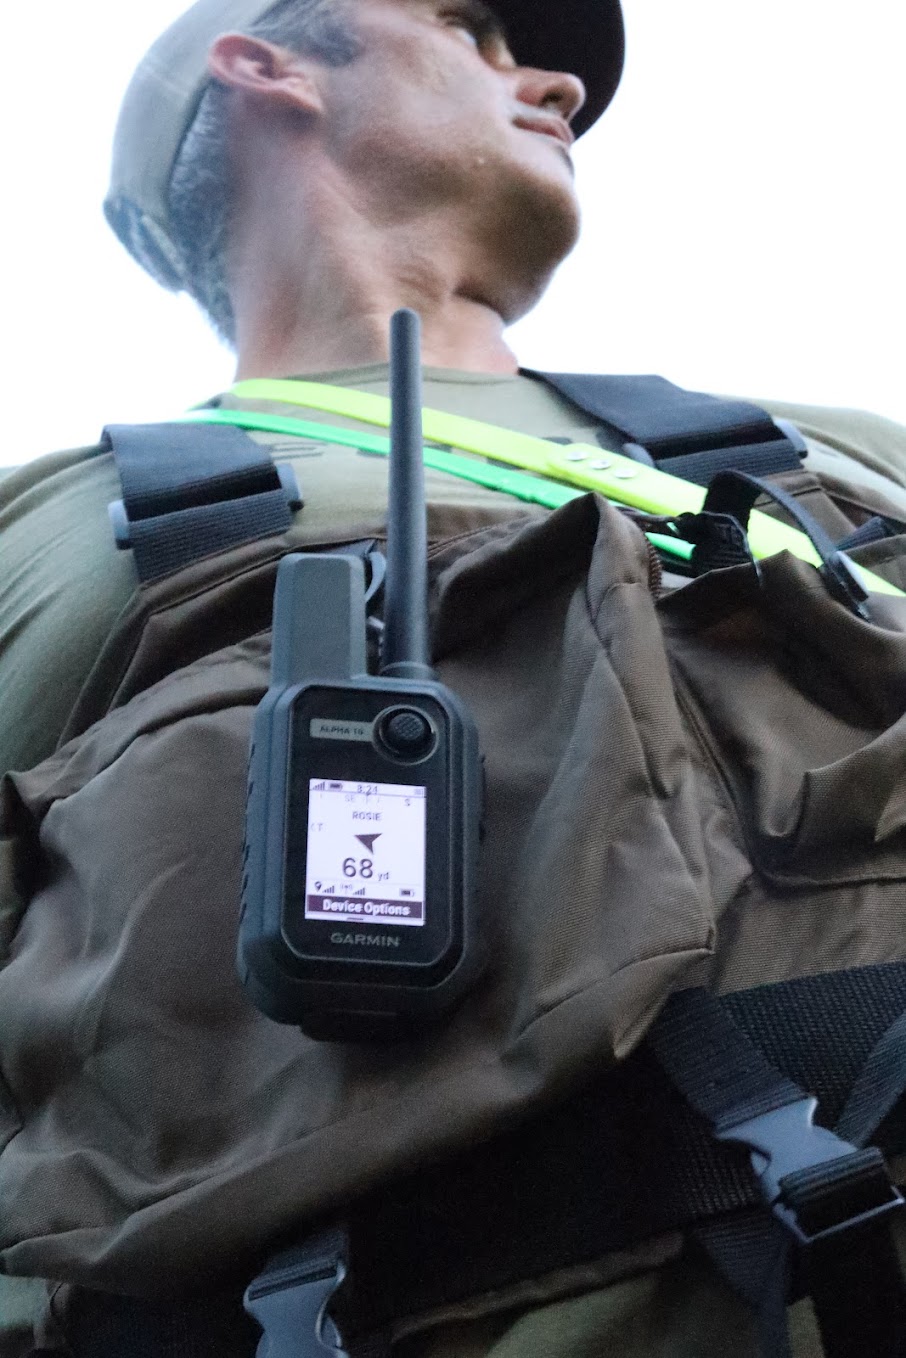 The Garmin Alpha 10 clipped to a hunter's vest